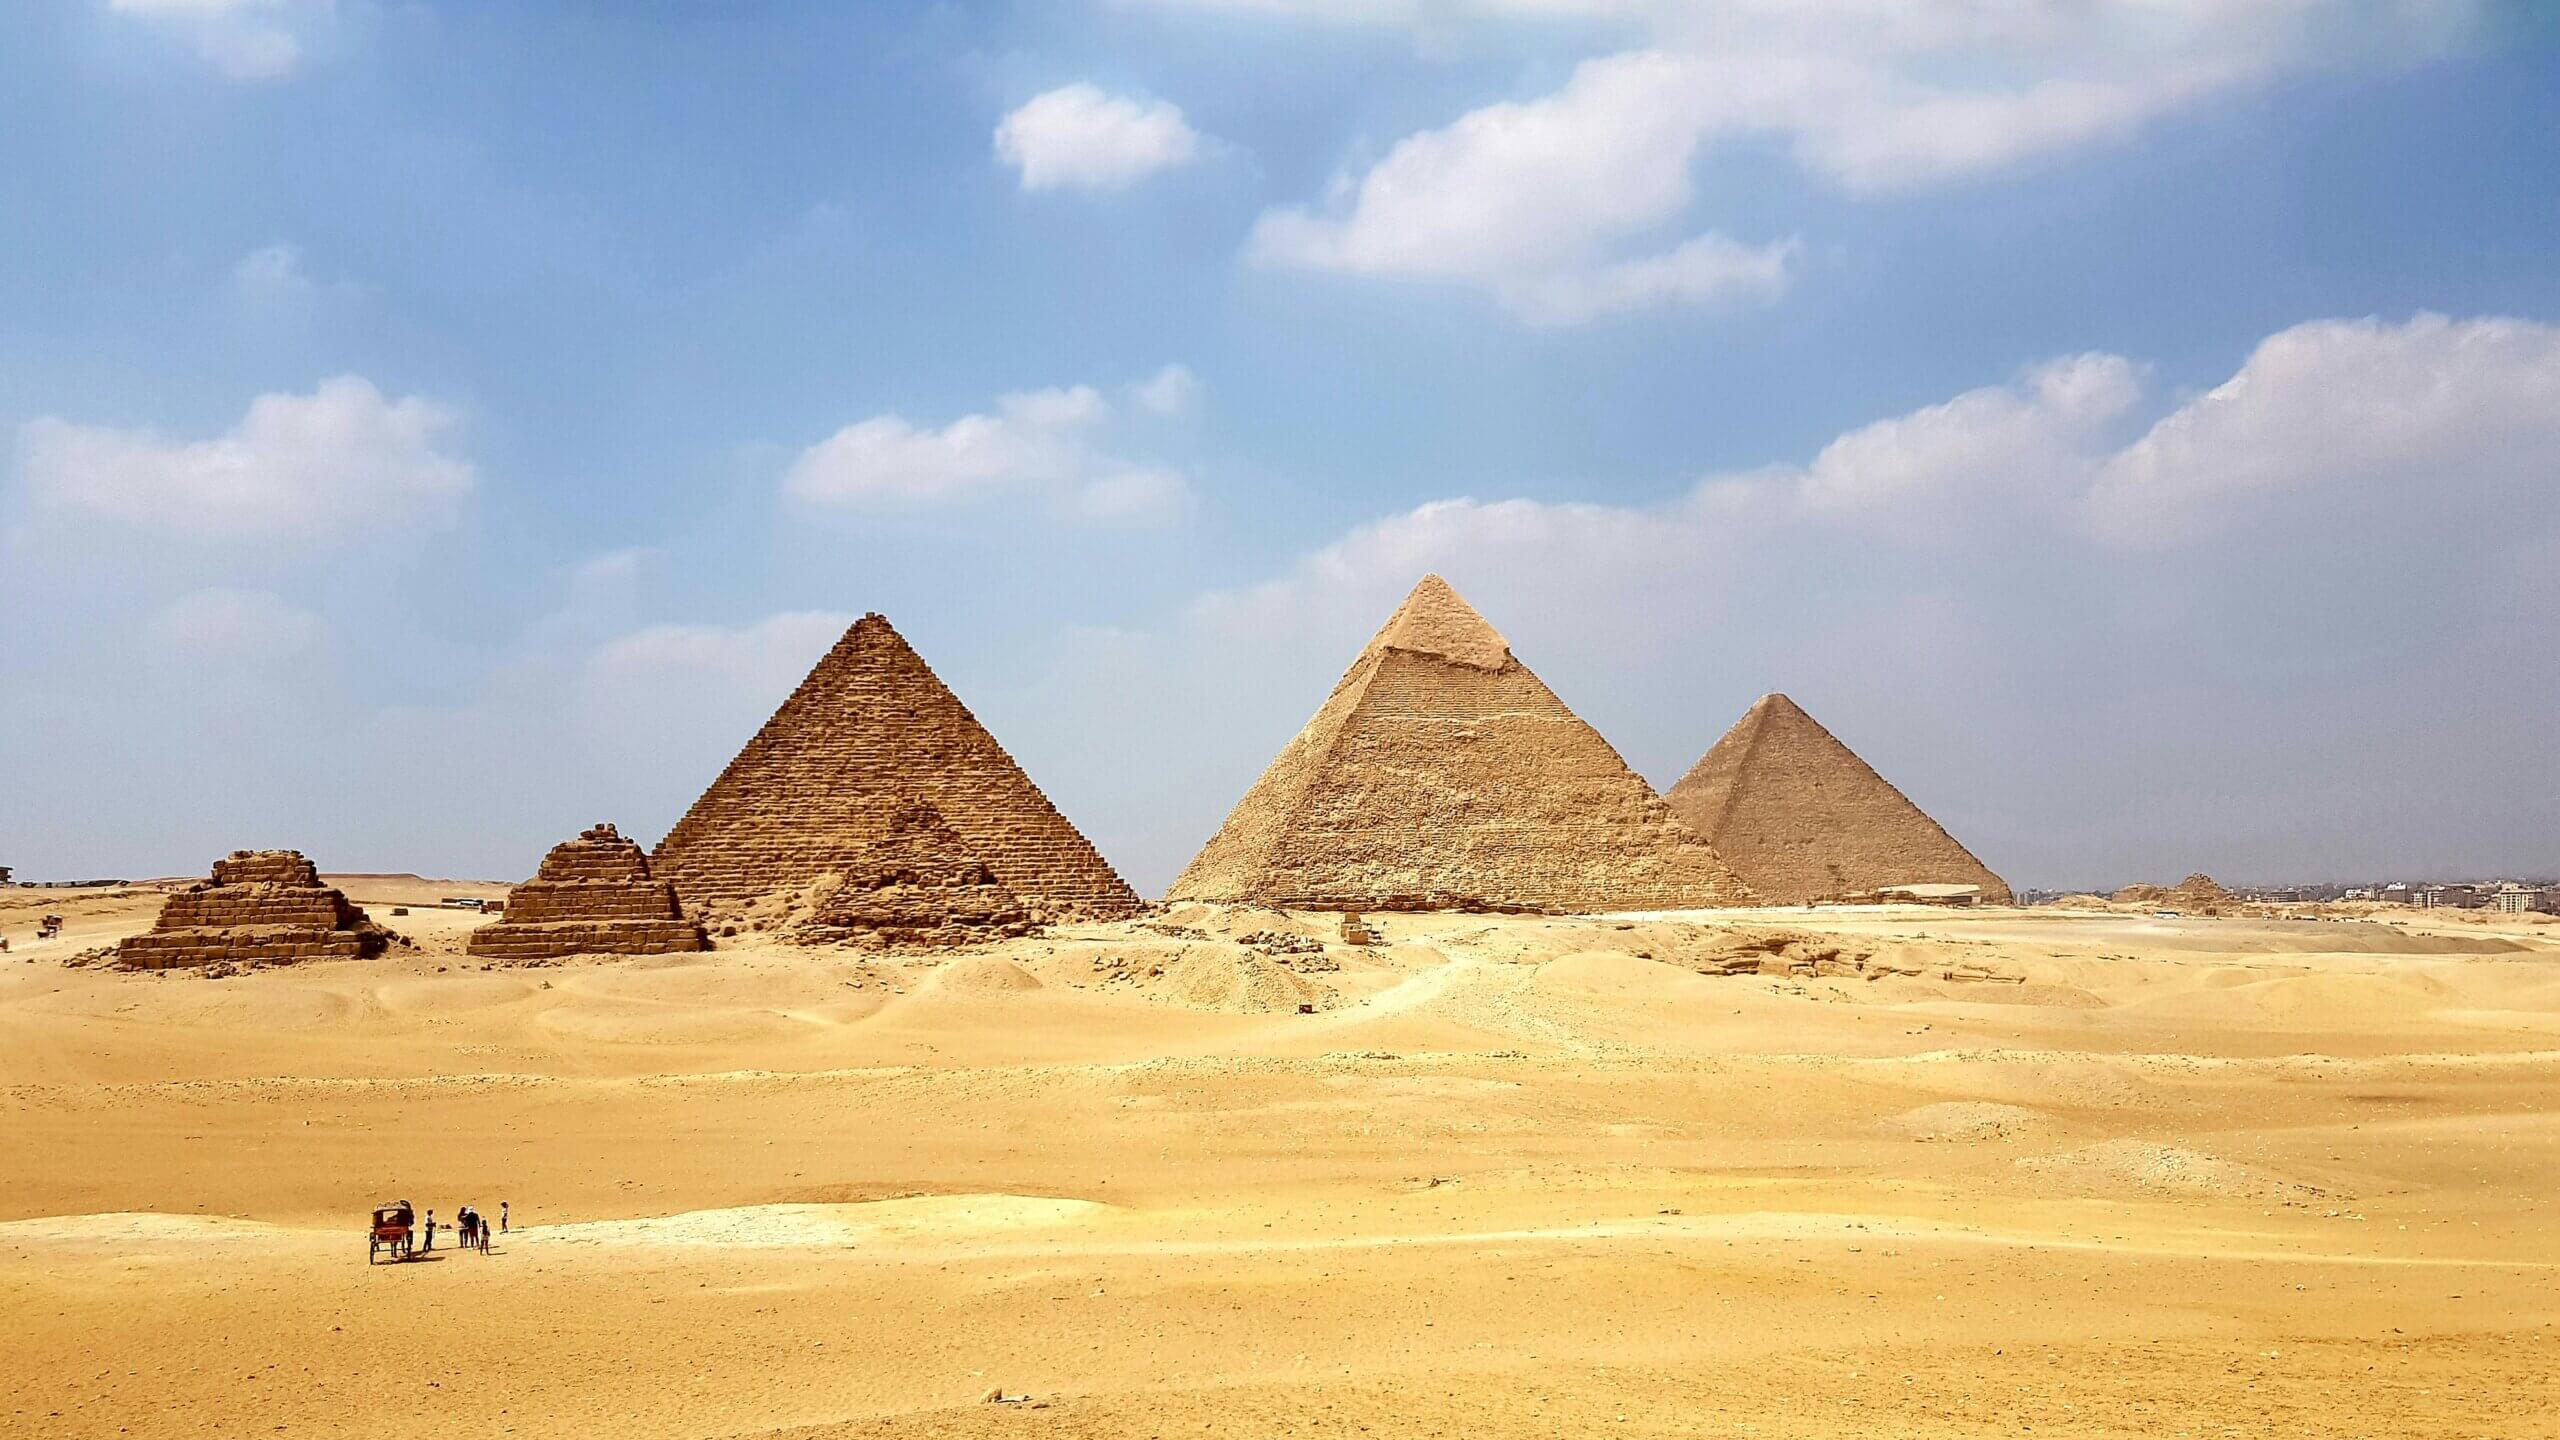 pyramids erected on the west bank of the Nile River near Al-Jīzah (Giza) in northern Egypt.